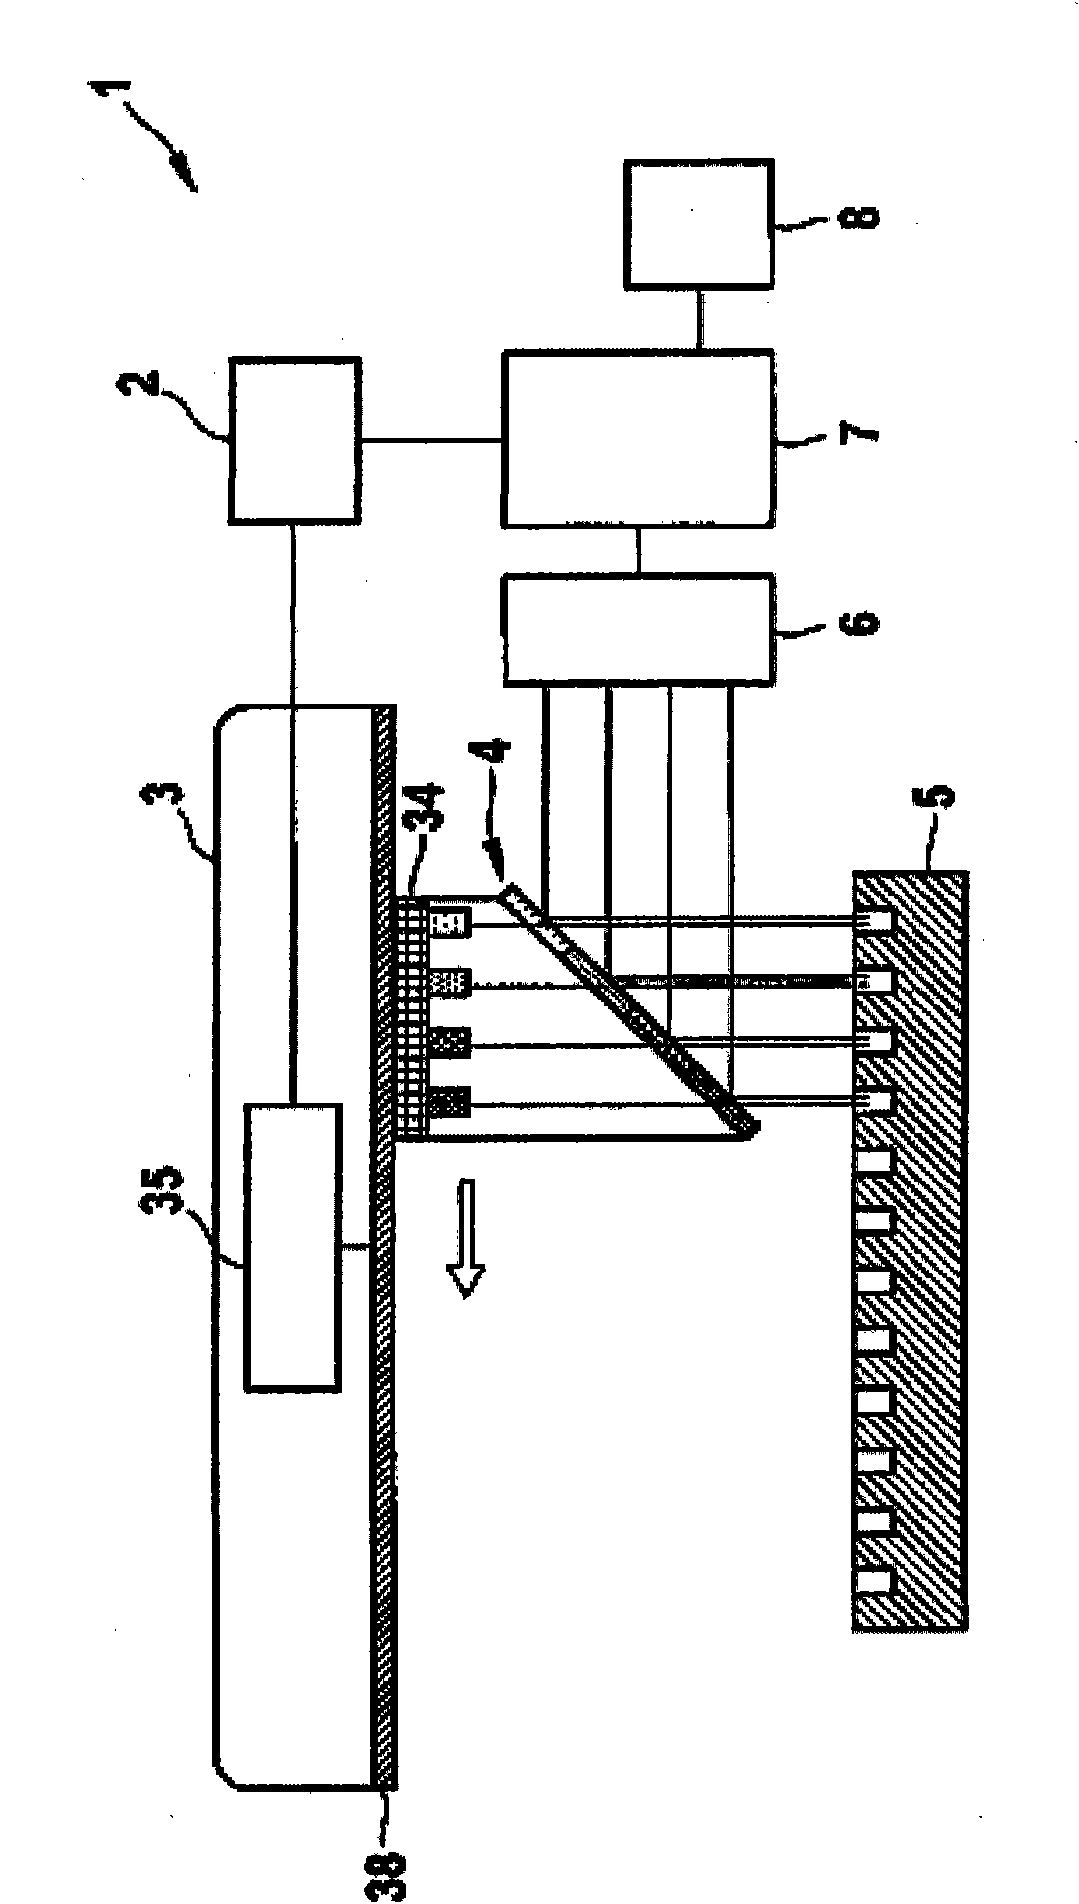 Device and method for radiometric measurement of plurality of samples